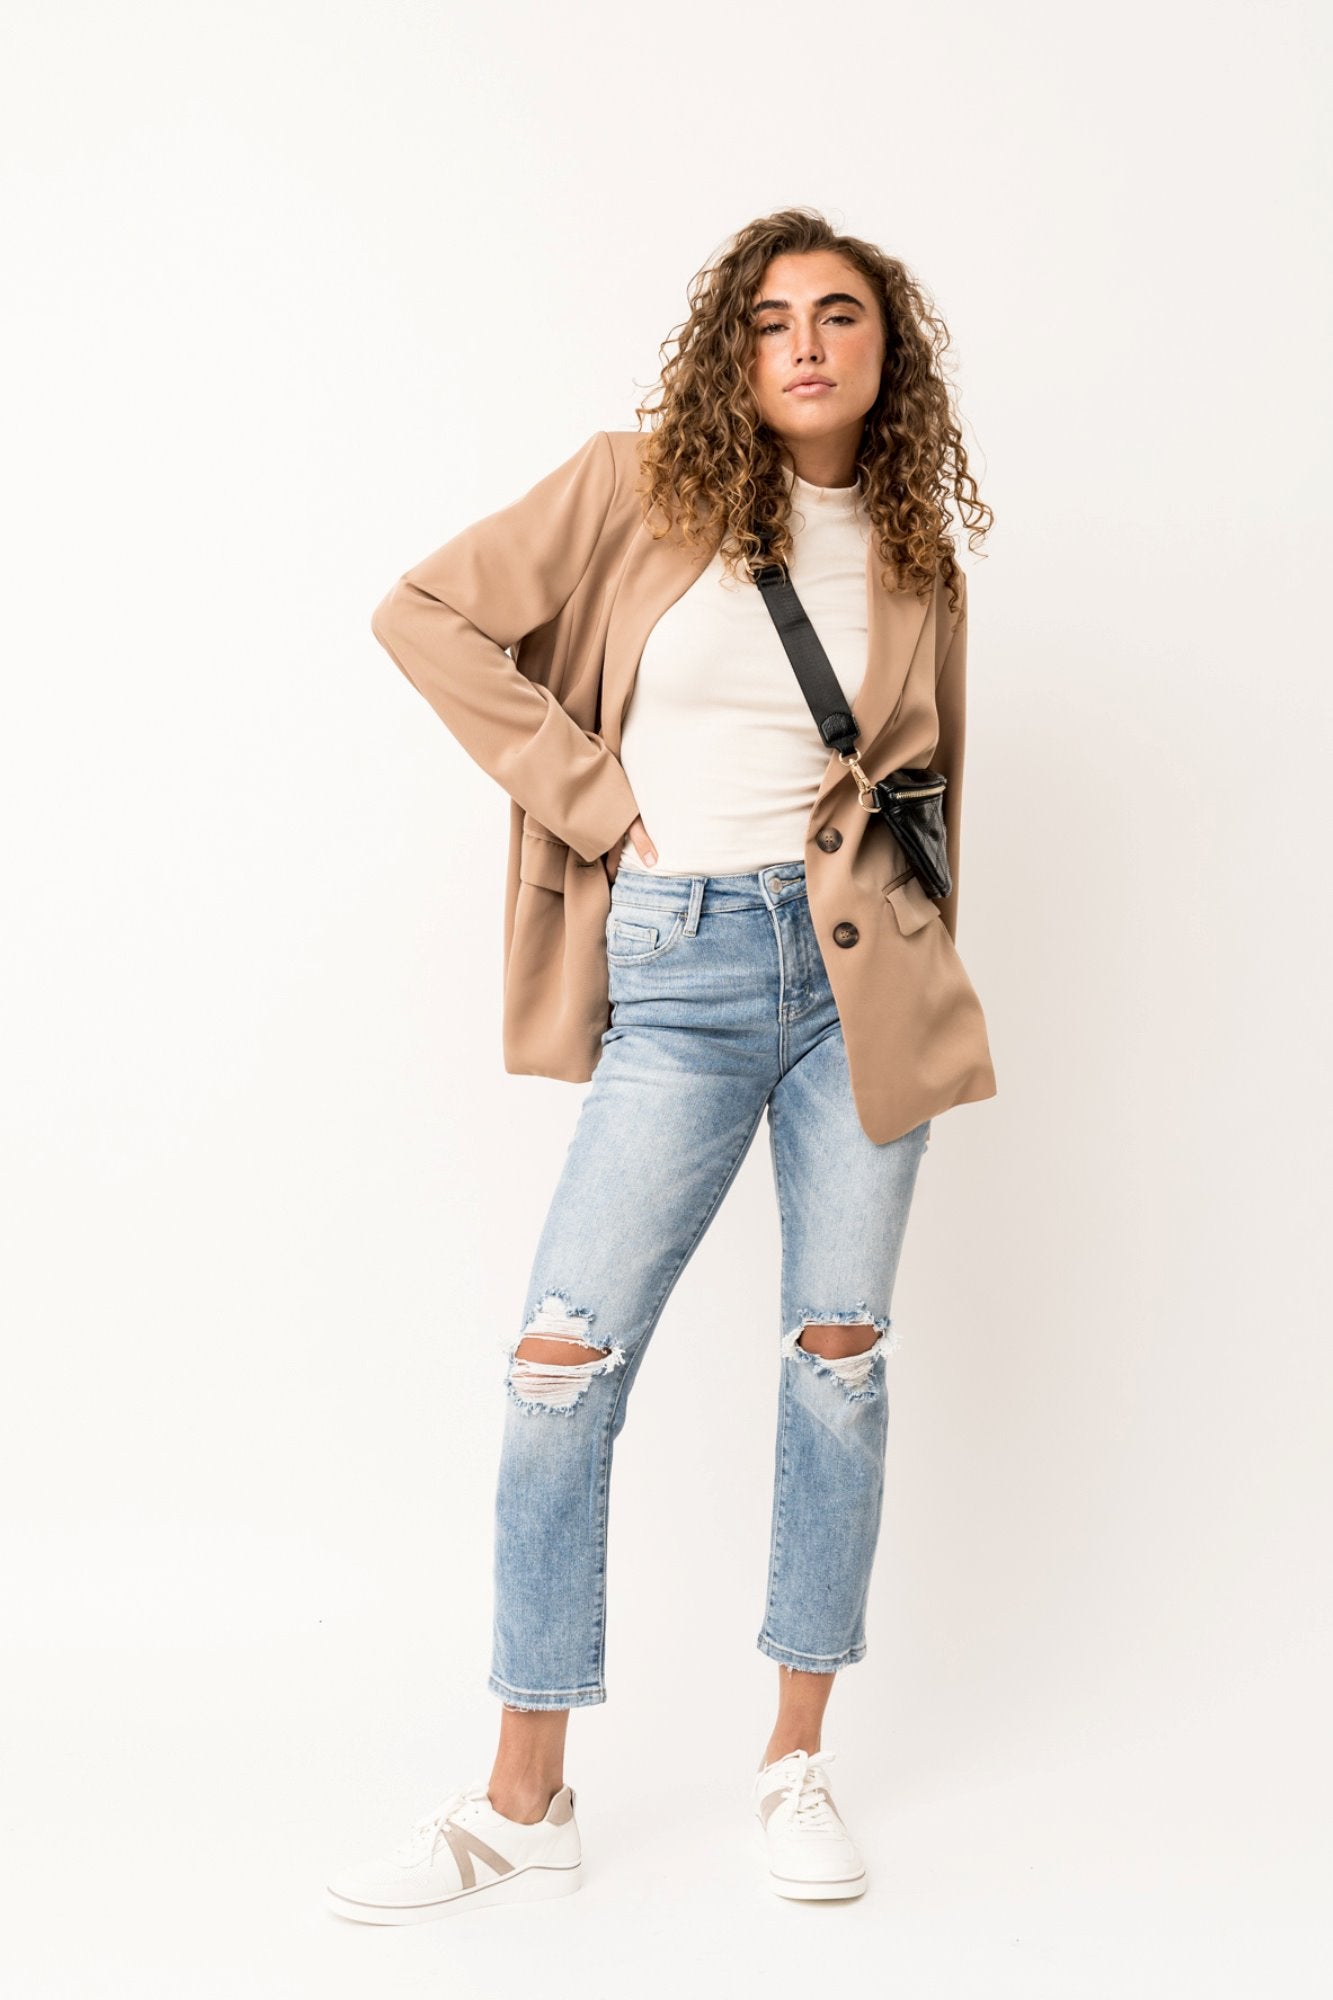 Sloane Jeans - Straight Leg, Mid Rise RESTOCK COMING Clothing Holley Girl 